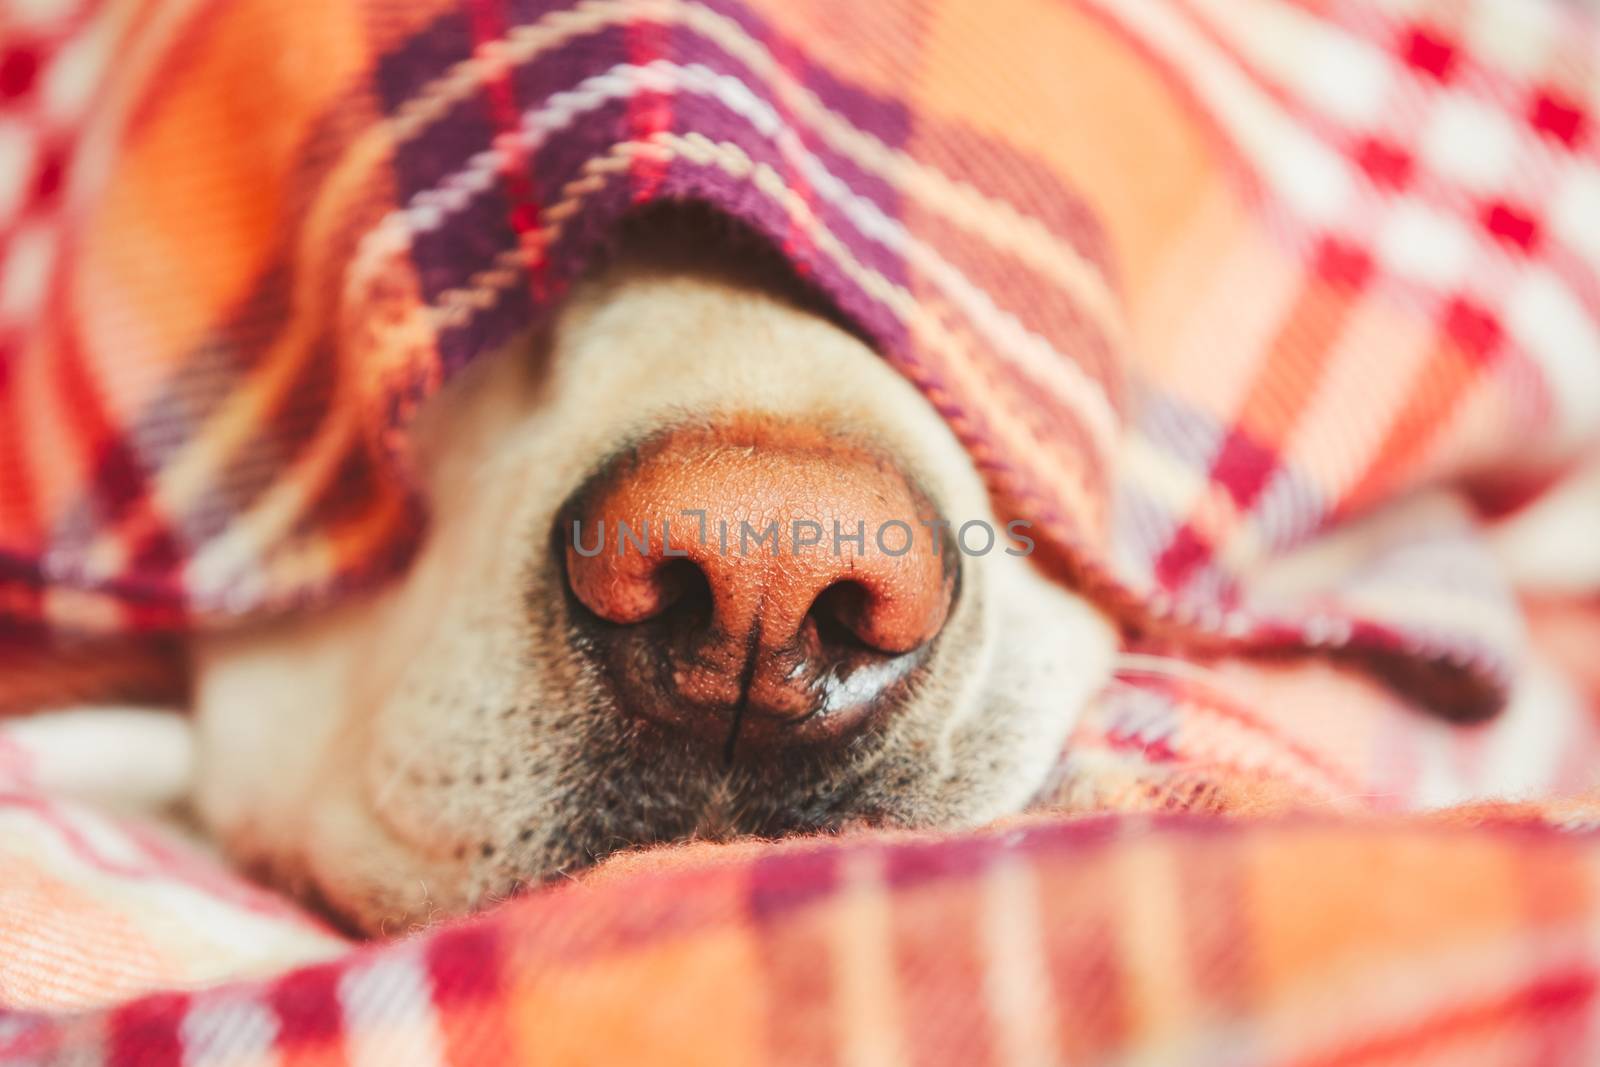 Snout of the sleepy dog (yellow labrador retriever) under the blanket on the bed.